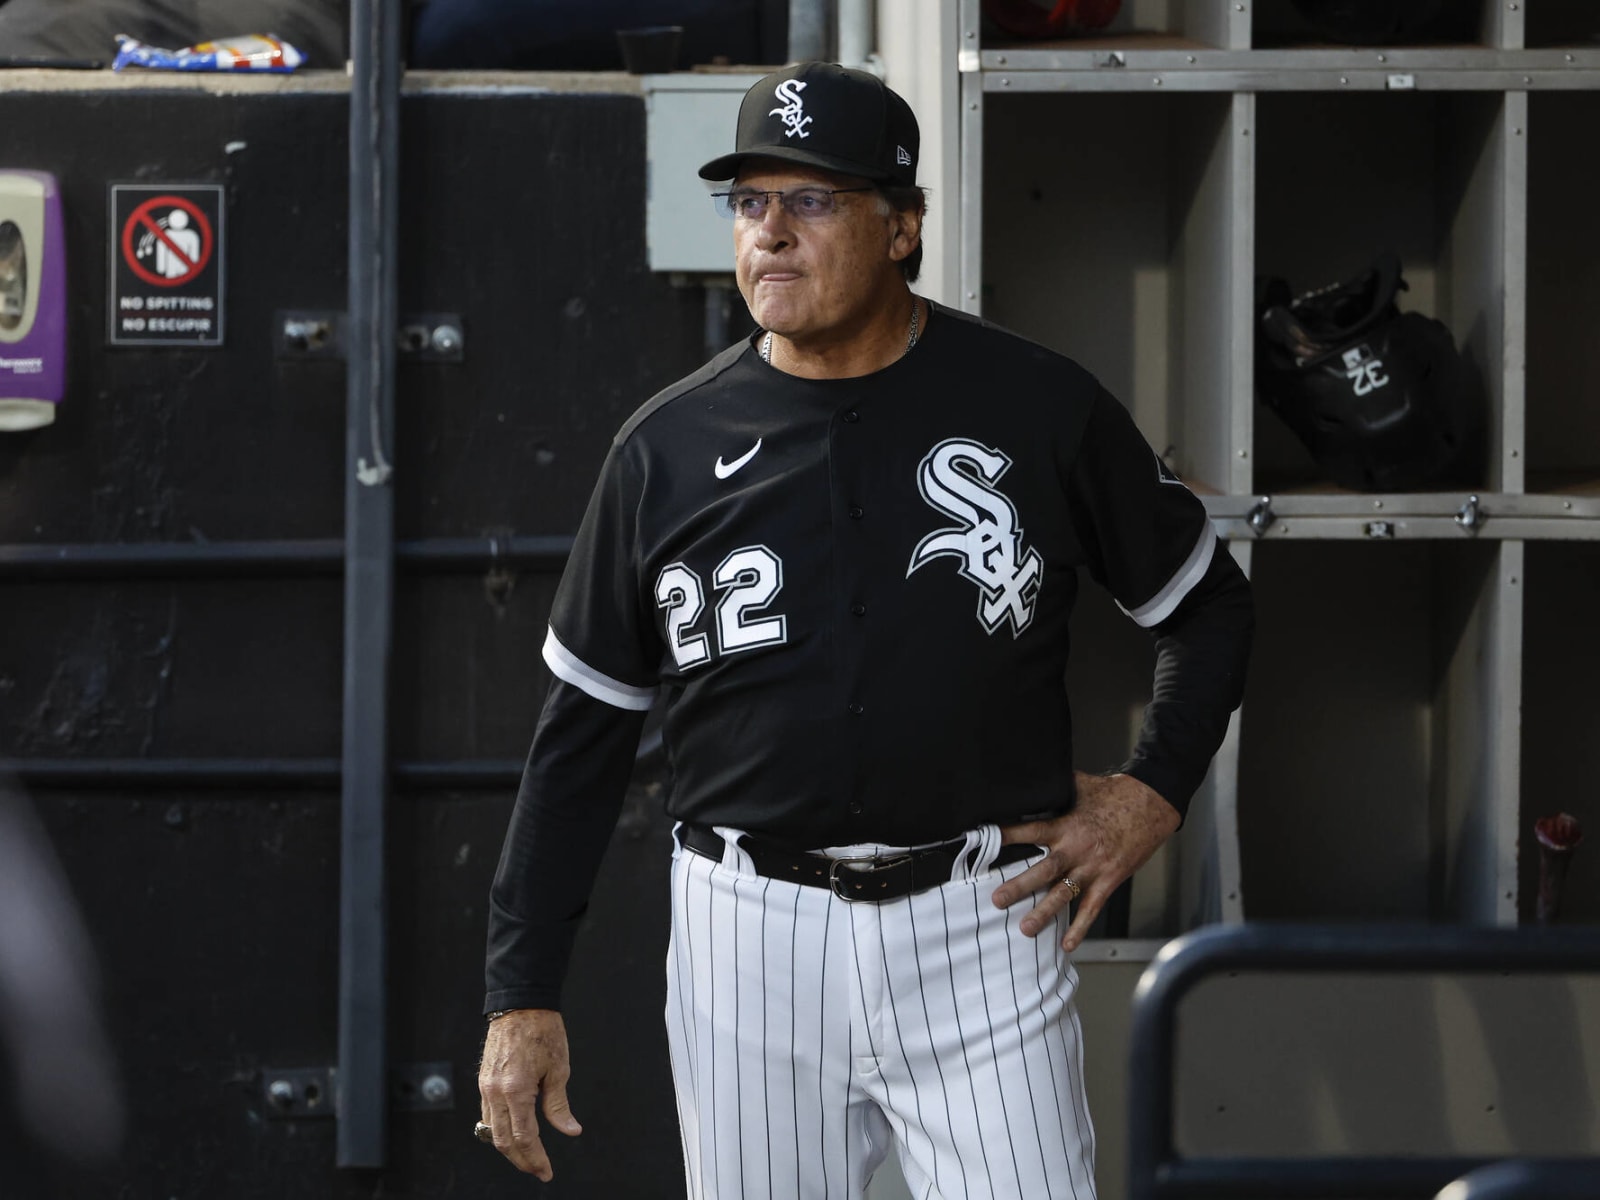 Tony La Russa: Chicago White Sox manager out indefinitely